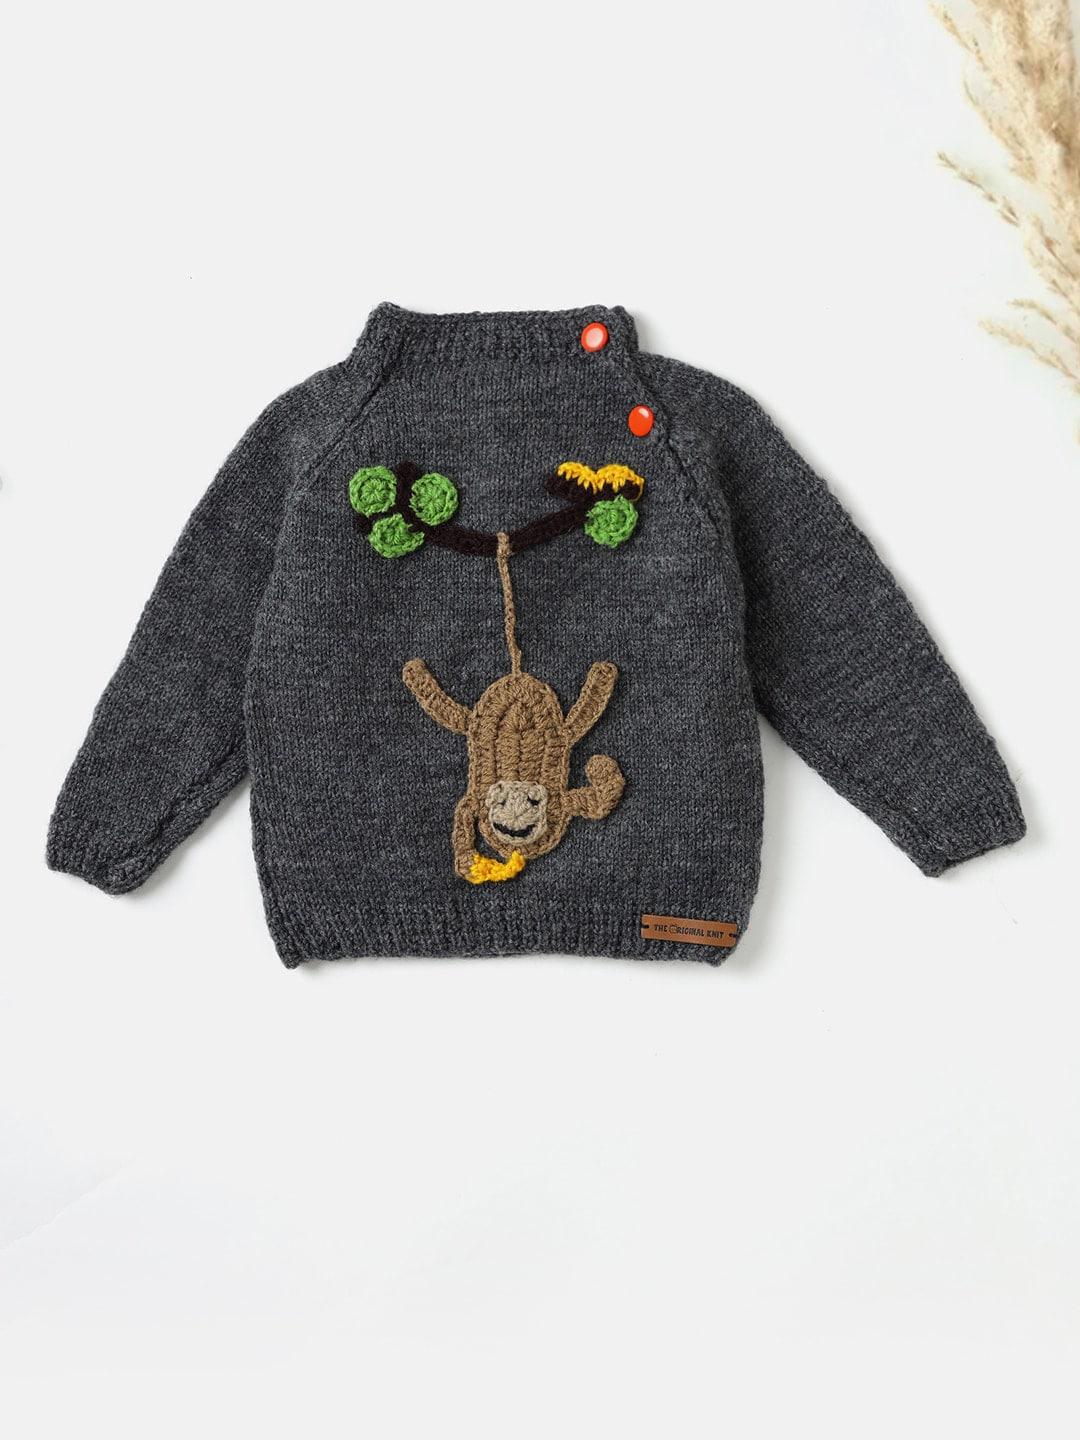 the original knit unisex kids charcoal & green pullover